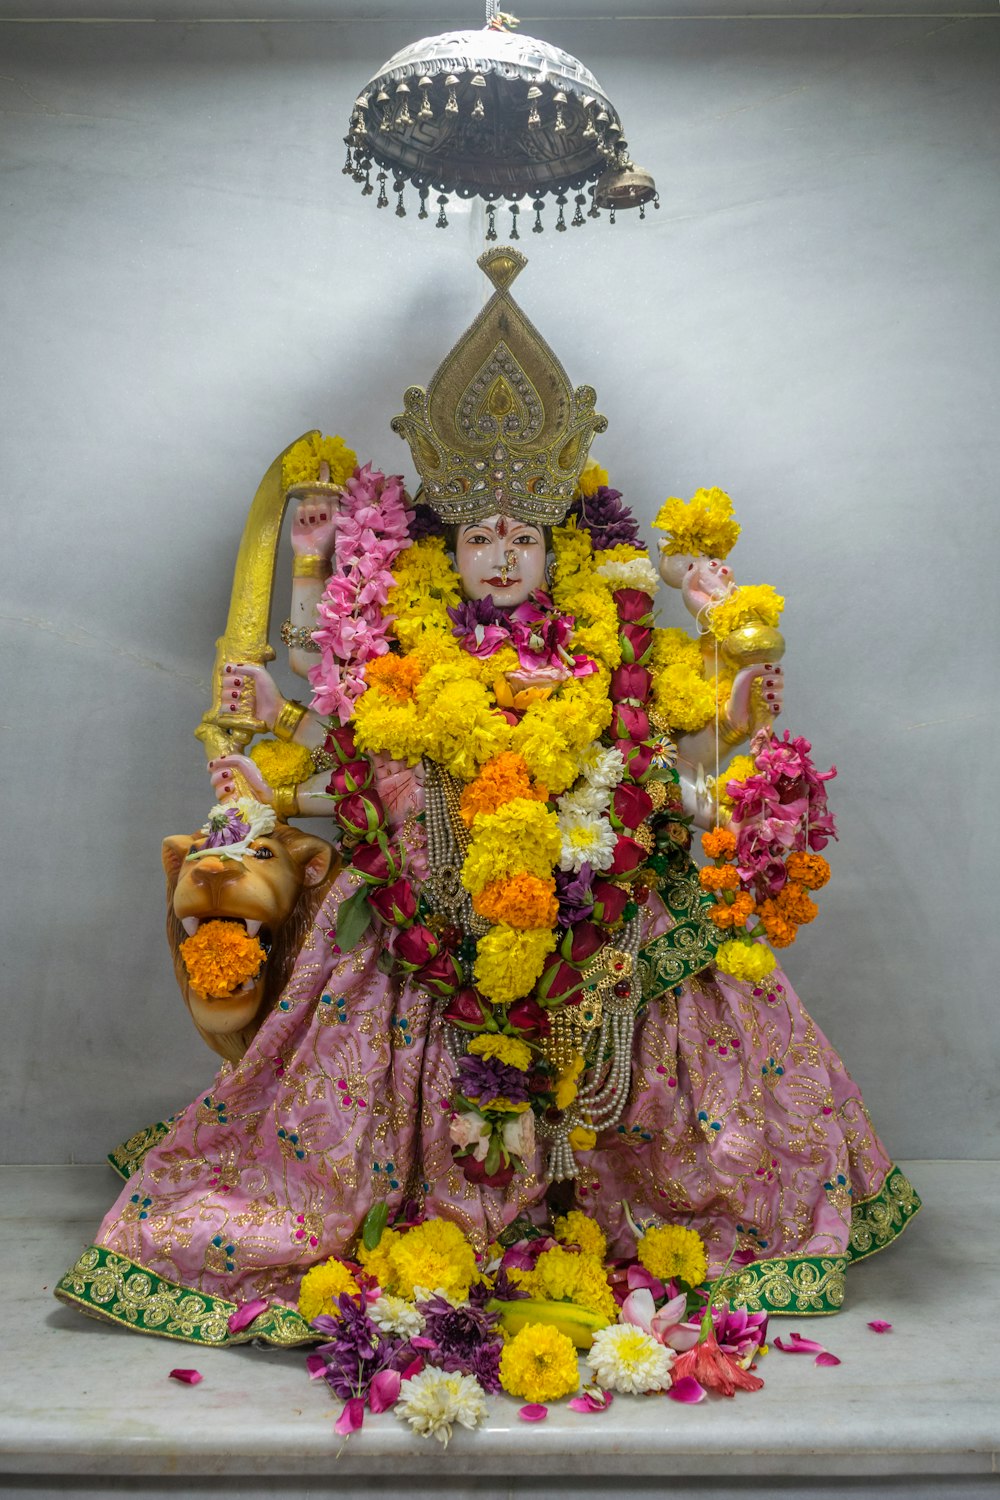 a statue of a person with flowers around it